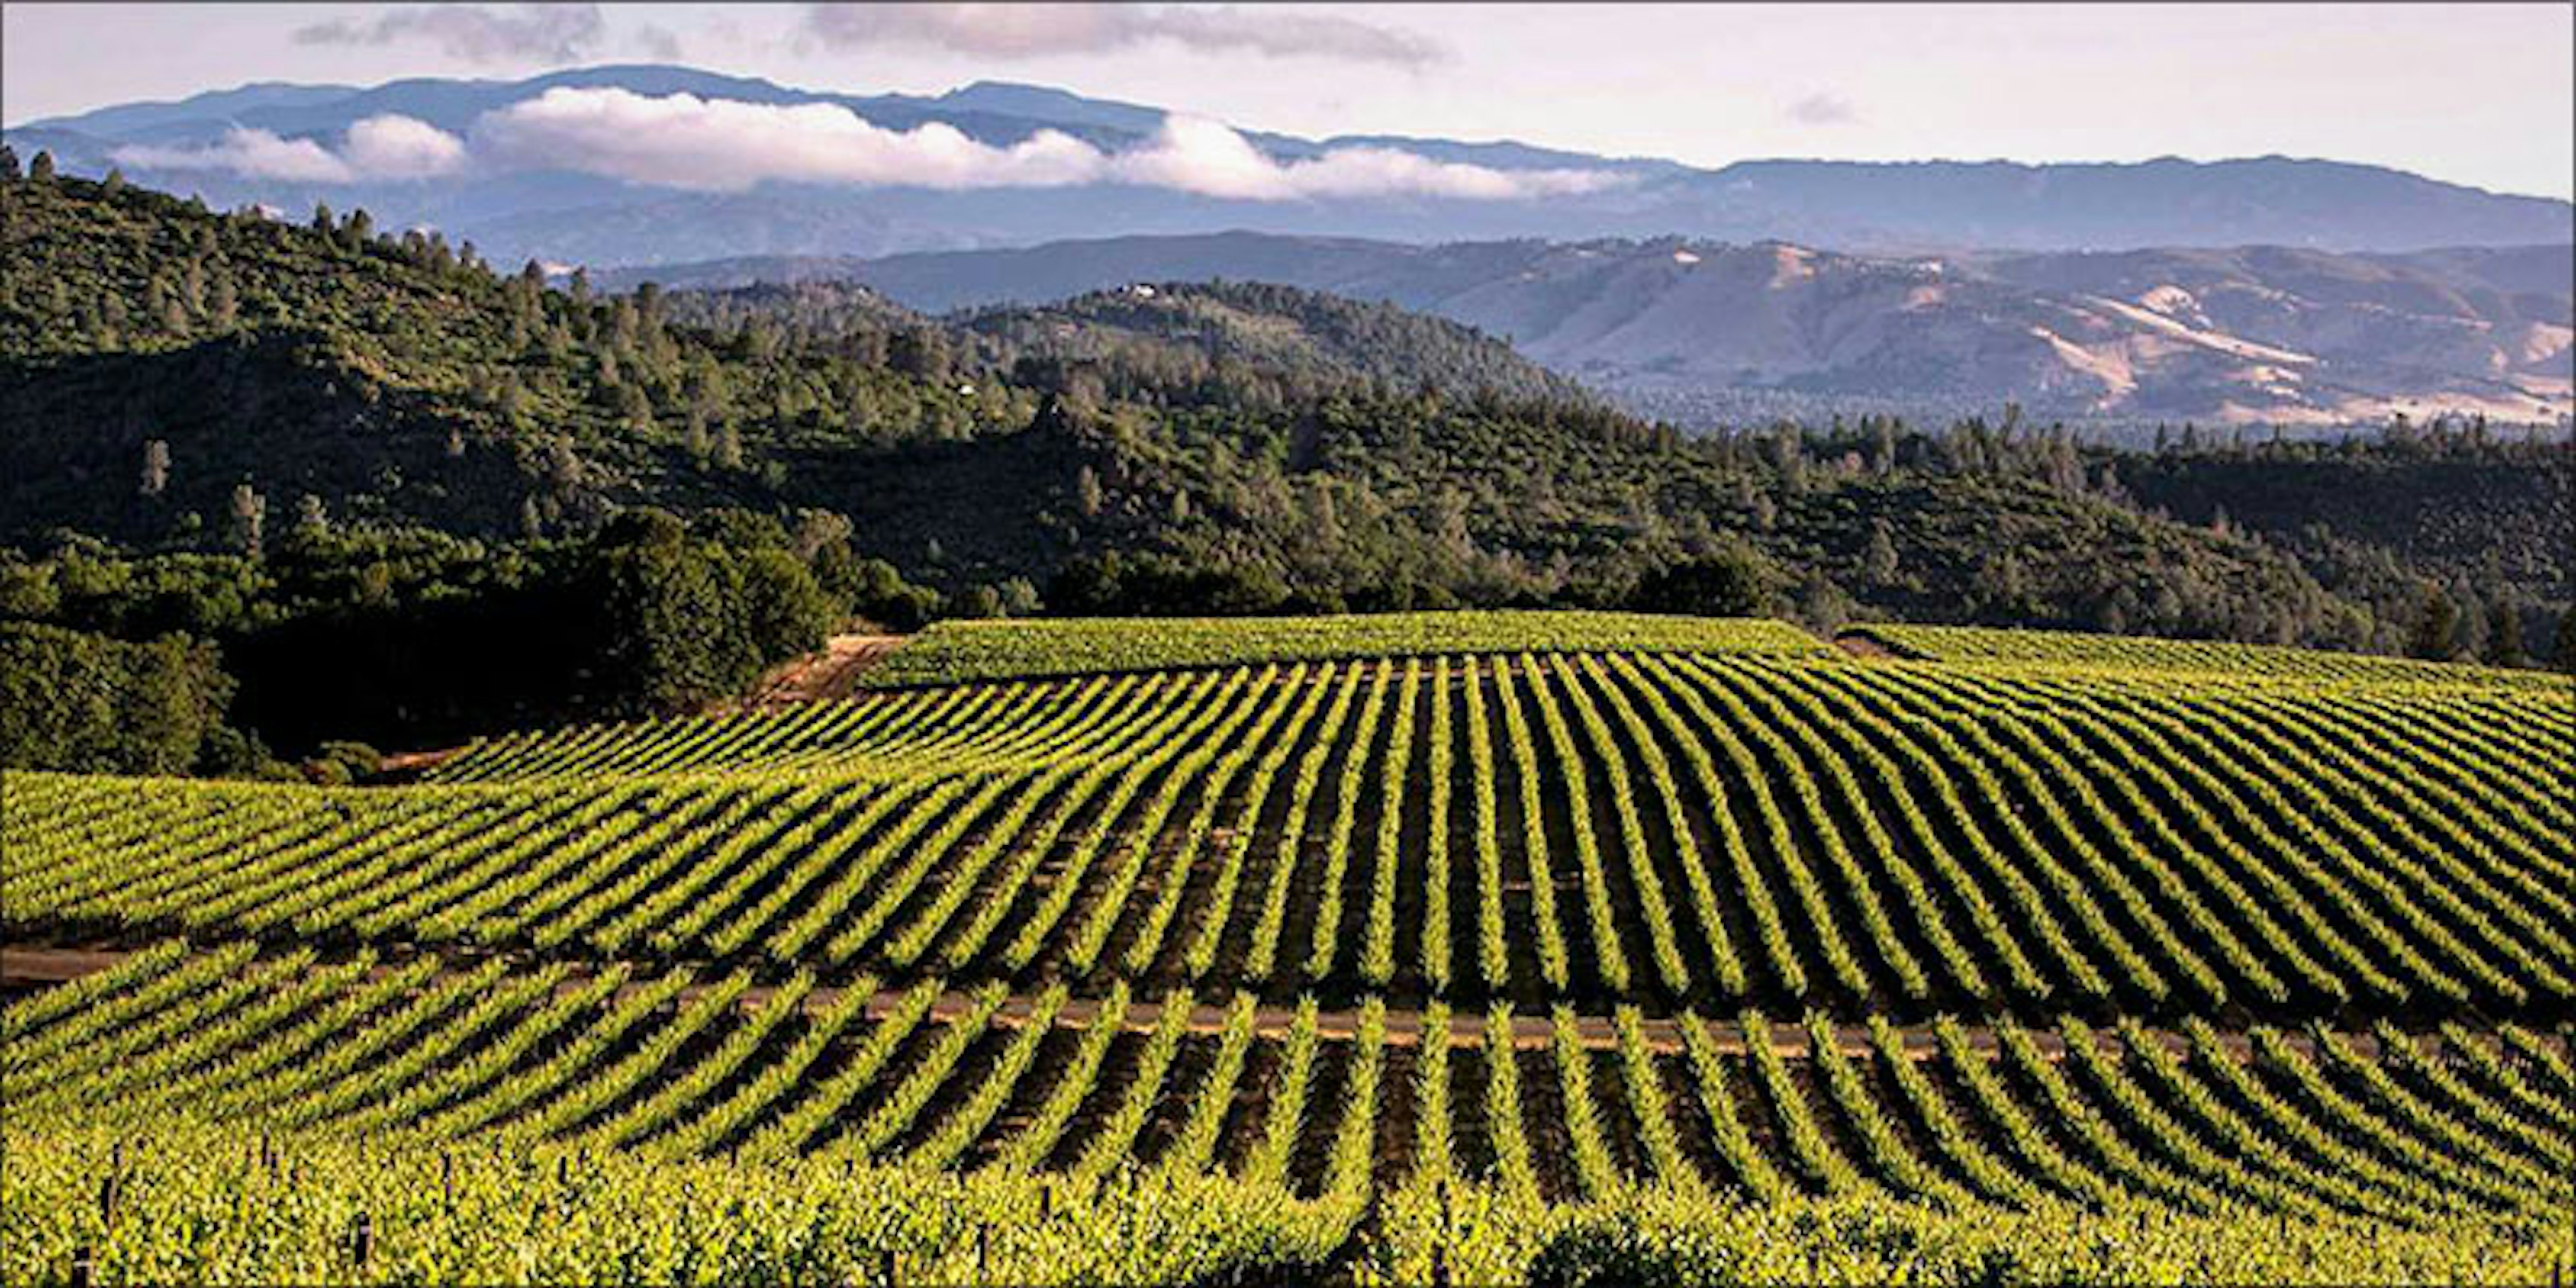 California's Famous Wine Country Is Looking More Like Cannabis Country